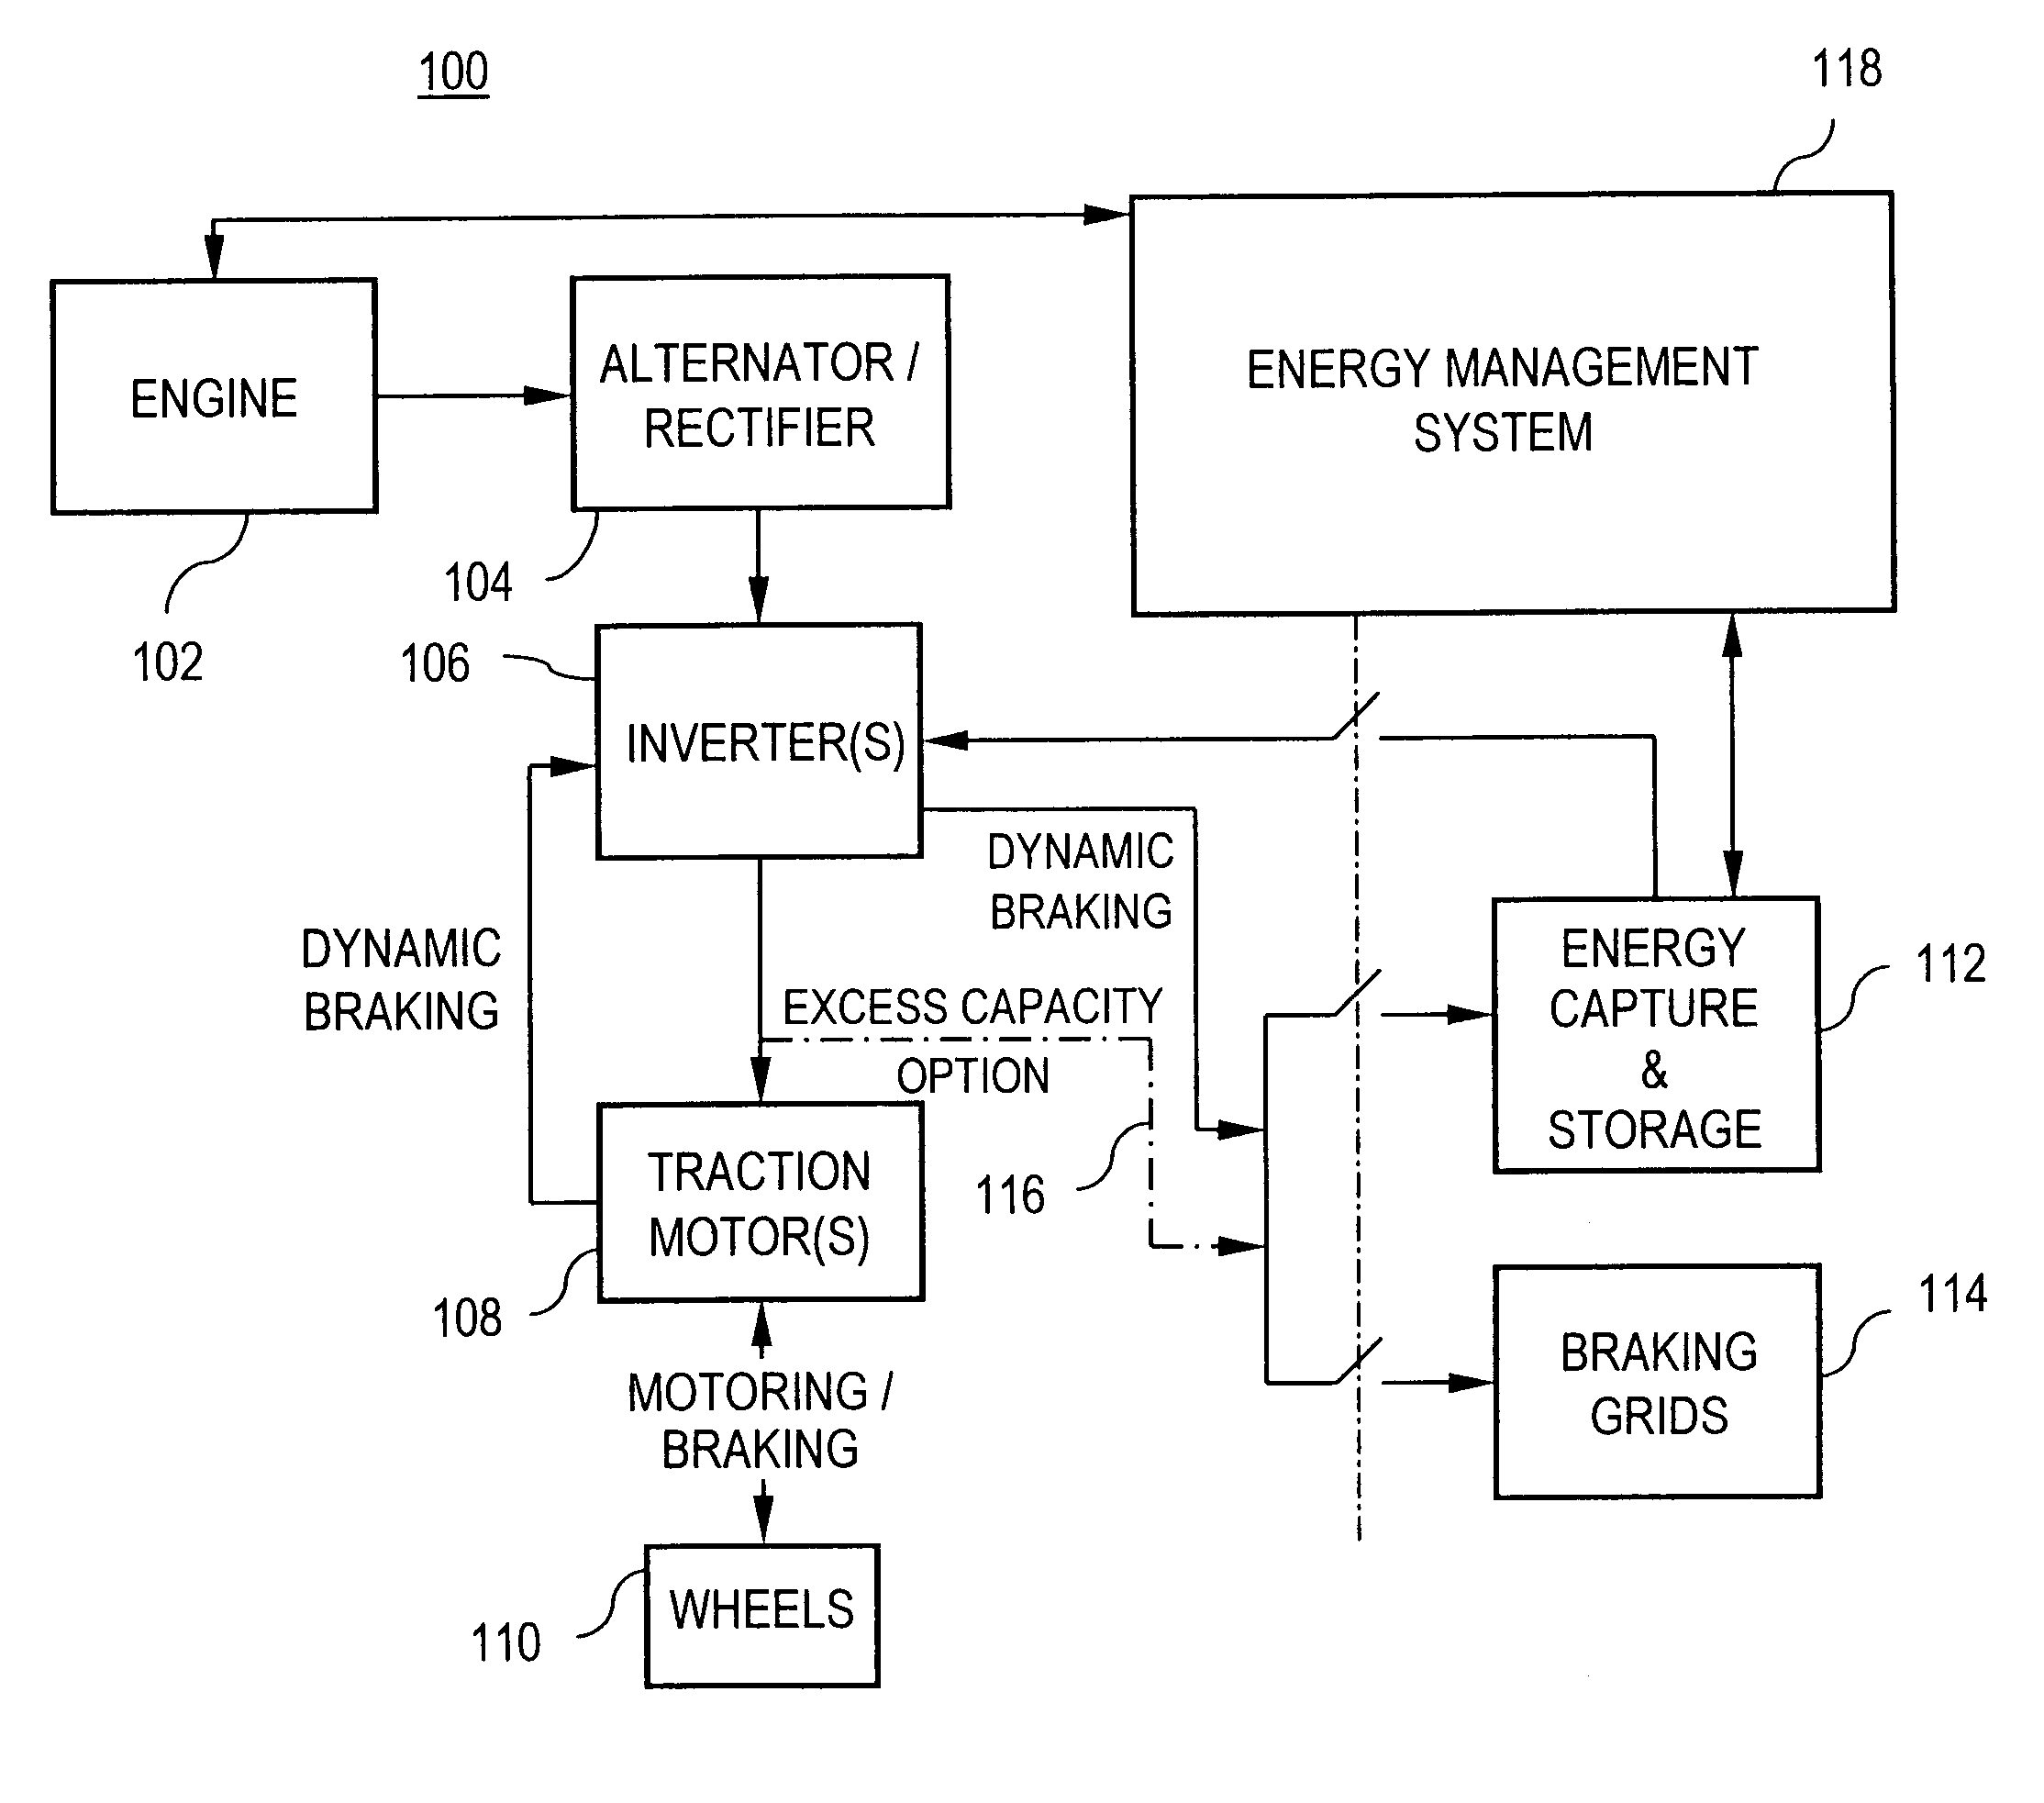 Method and system for optimizing energy storage in hybrid off-highway vehicle systems and trolley connected OHV systems